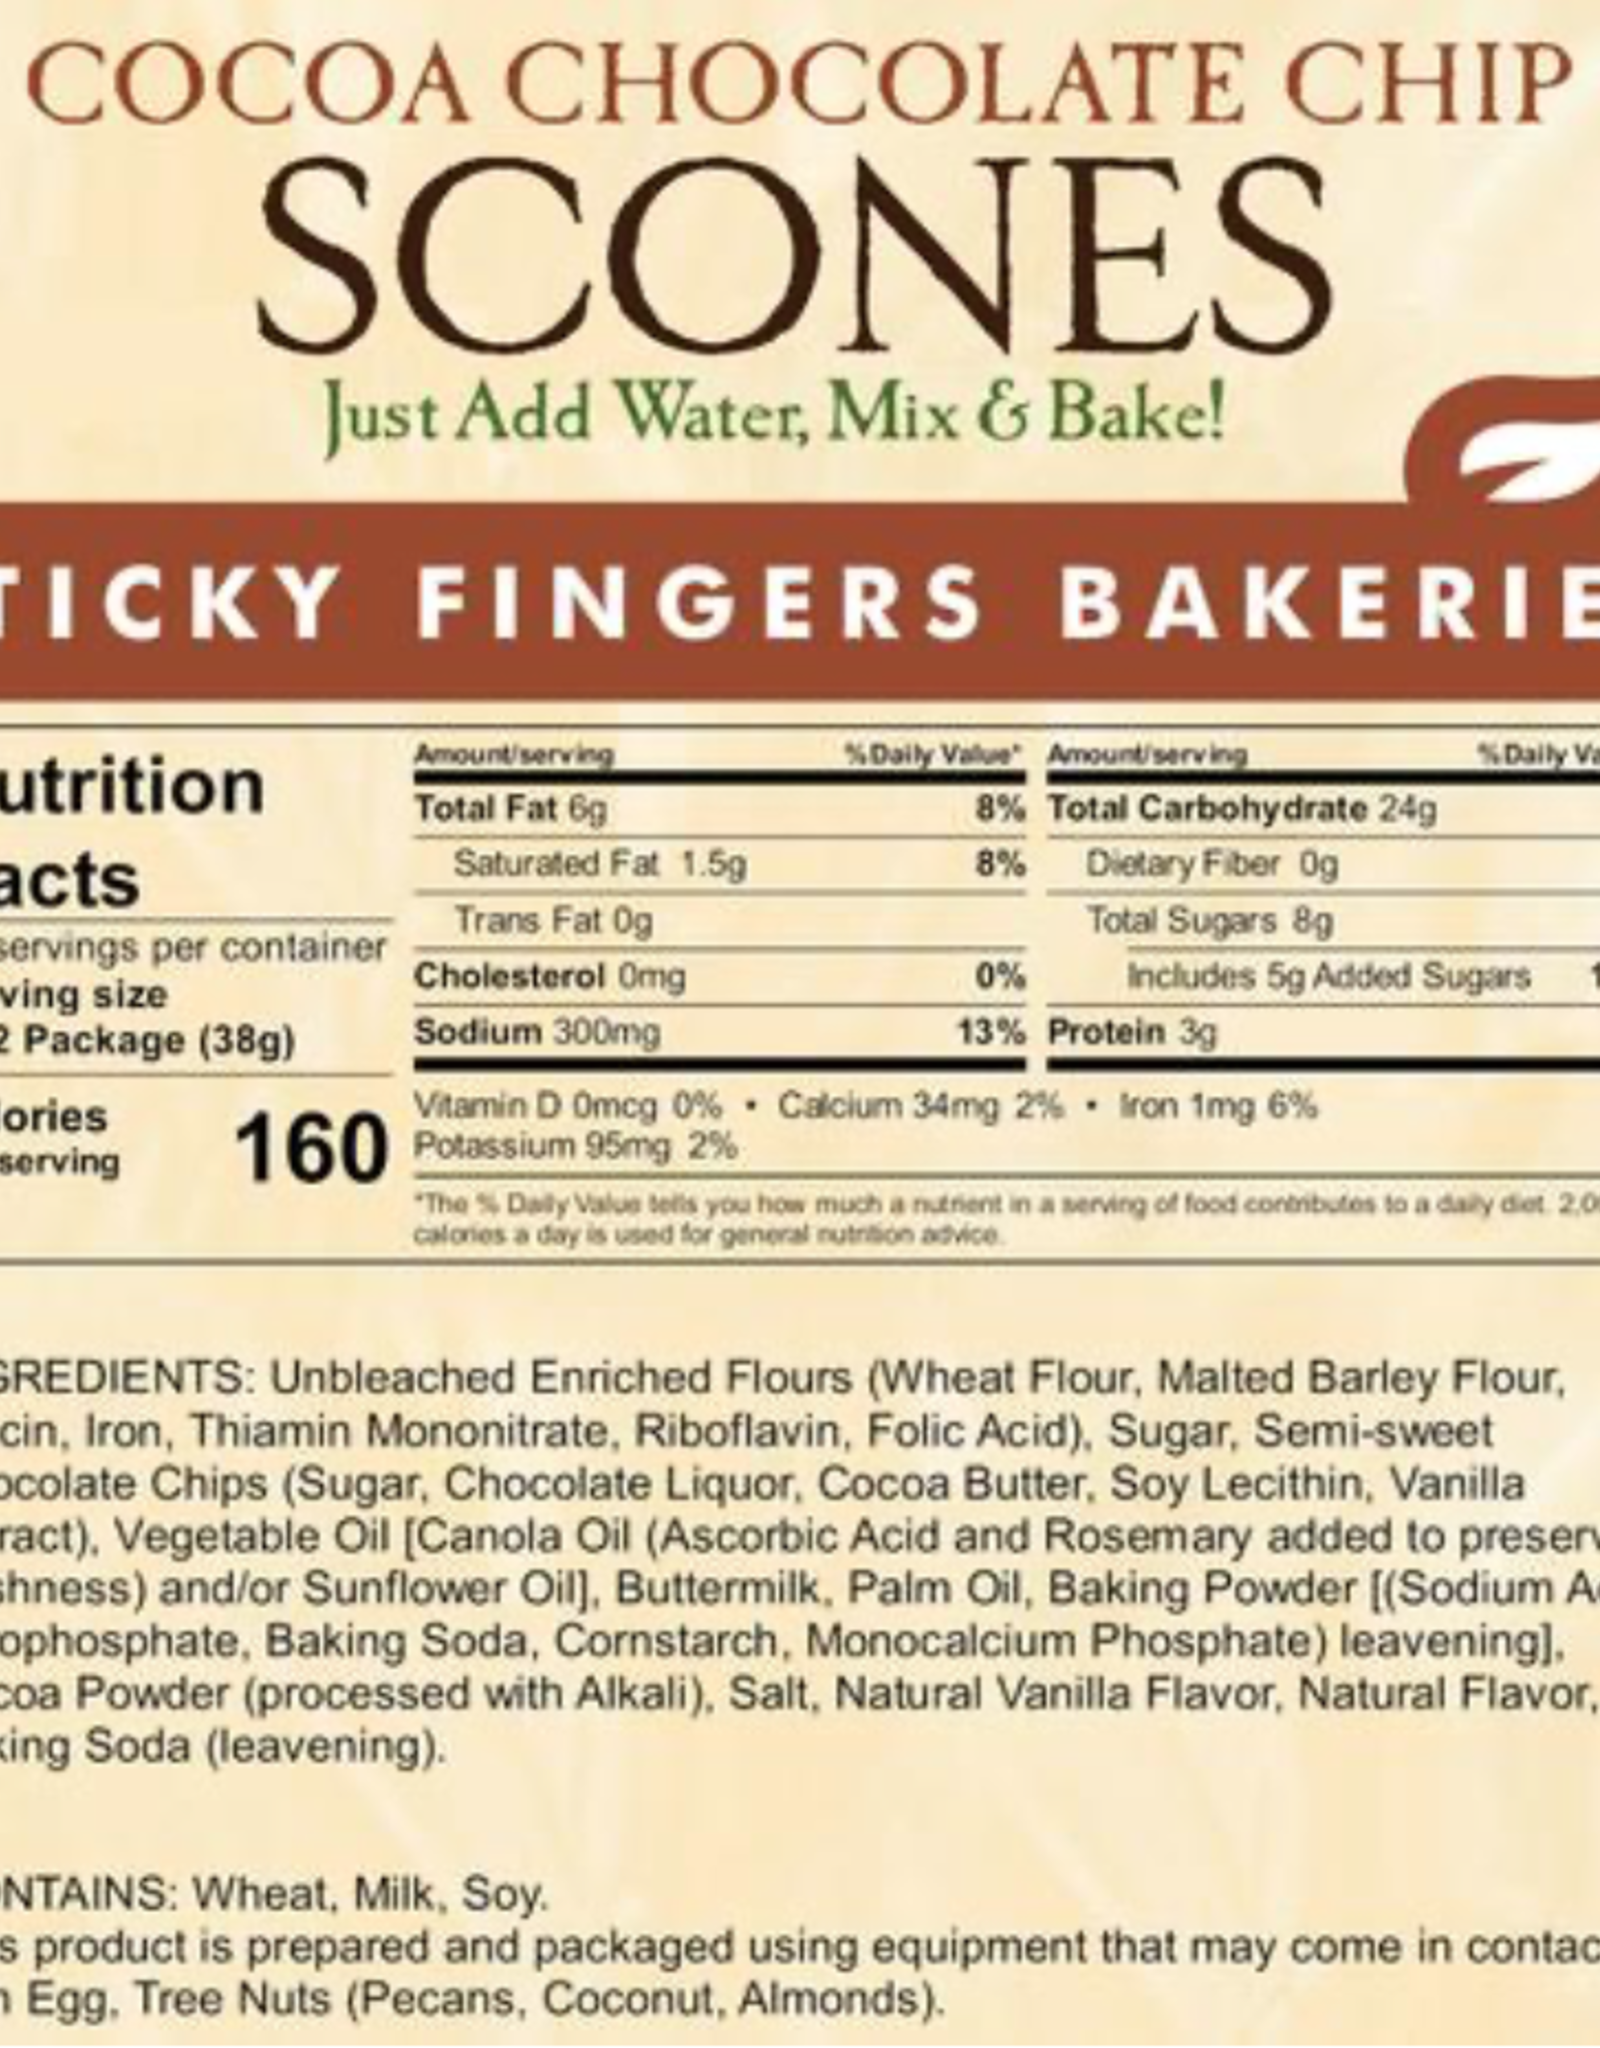 Sticky Fingers Bakery - Cocoa Chocolate Chip Scones Mix